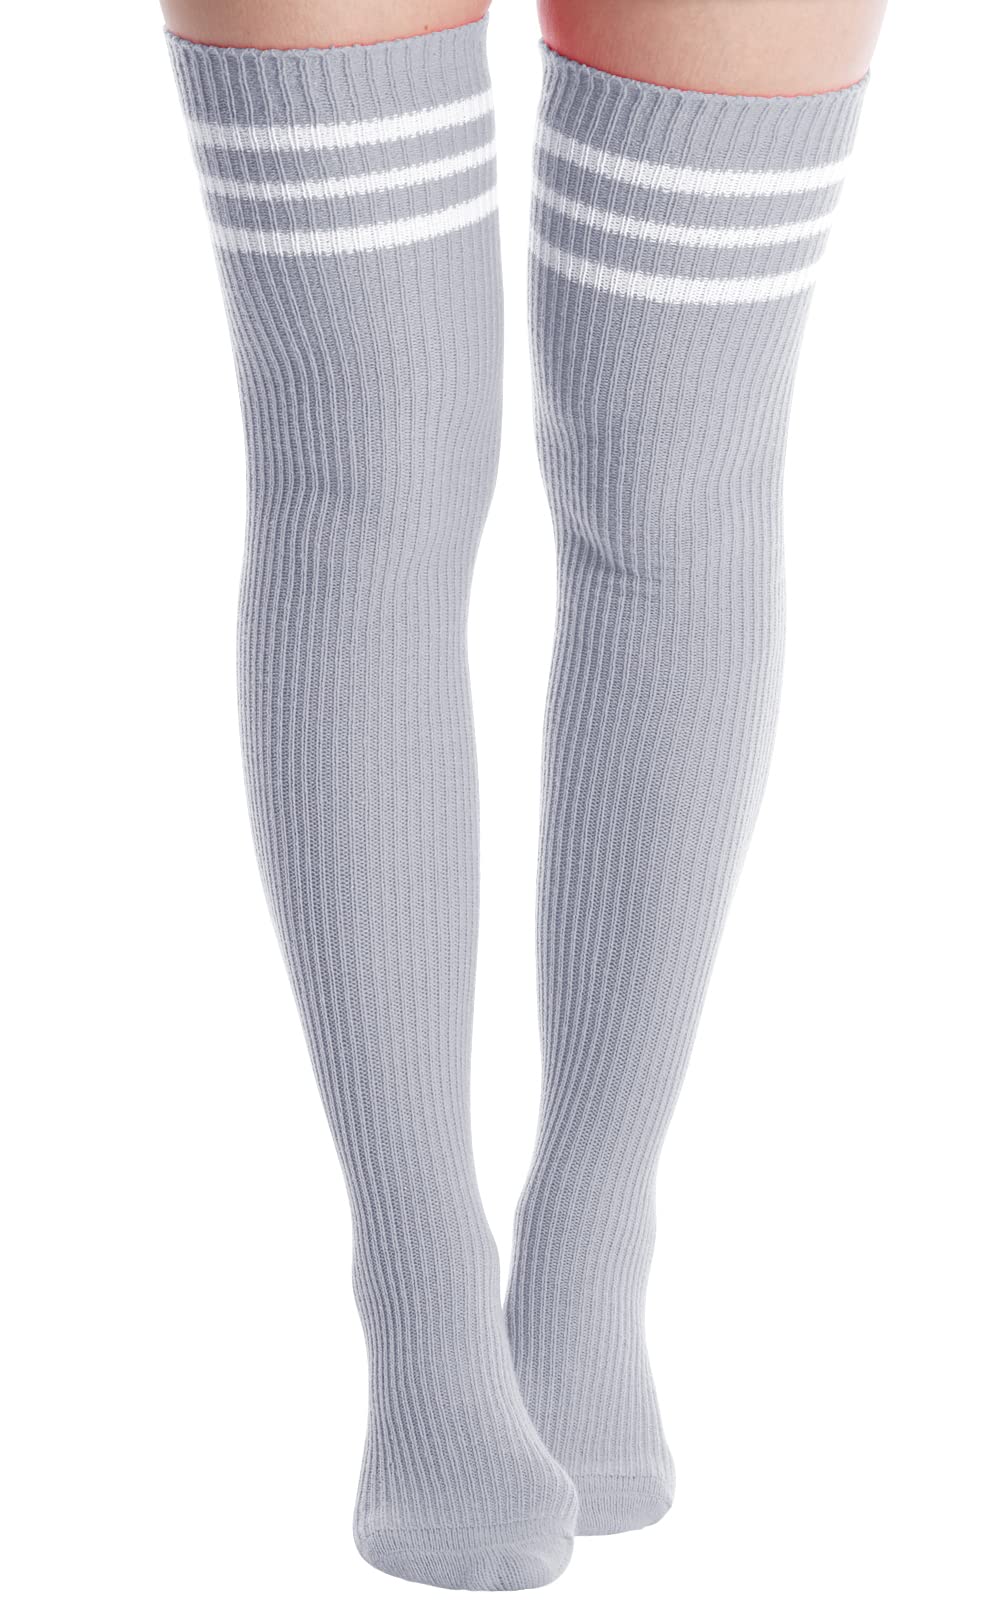 Extra Long Warm Knit Striped Thigh Highs Leg Warmers-Grey & White Striped - Moon Wood